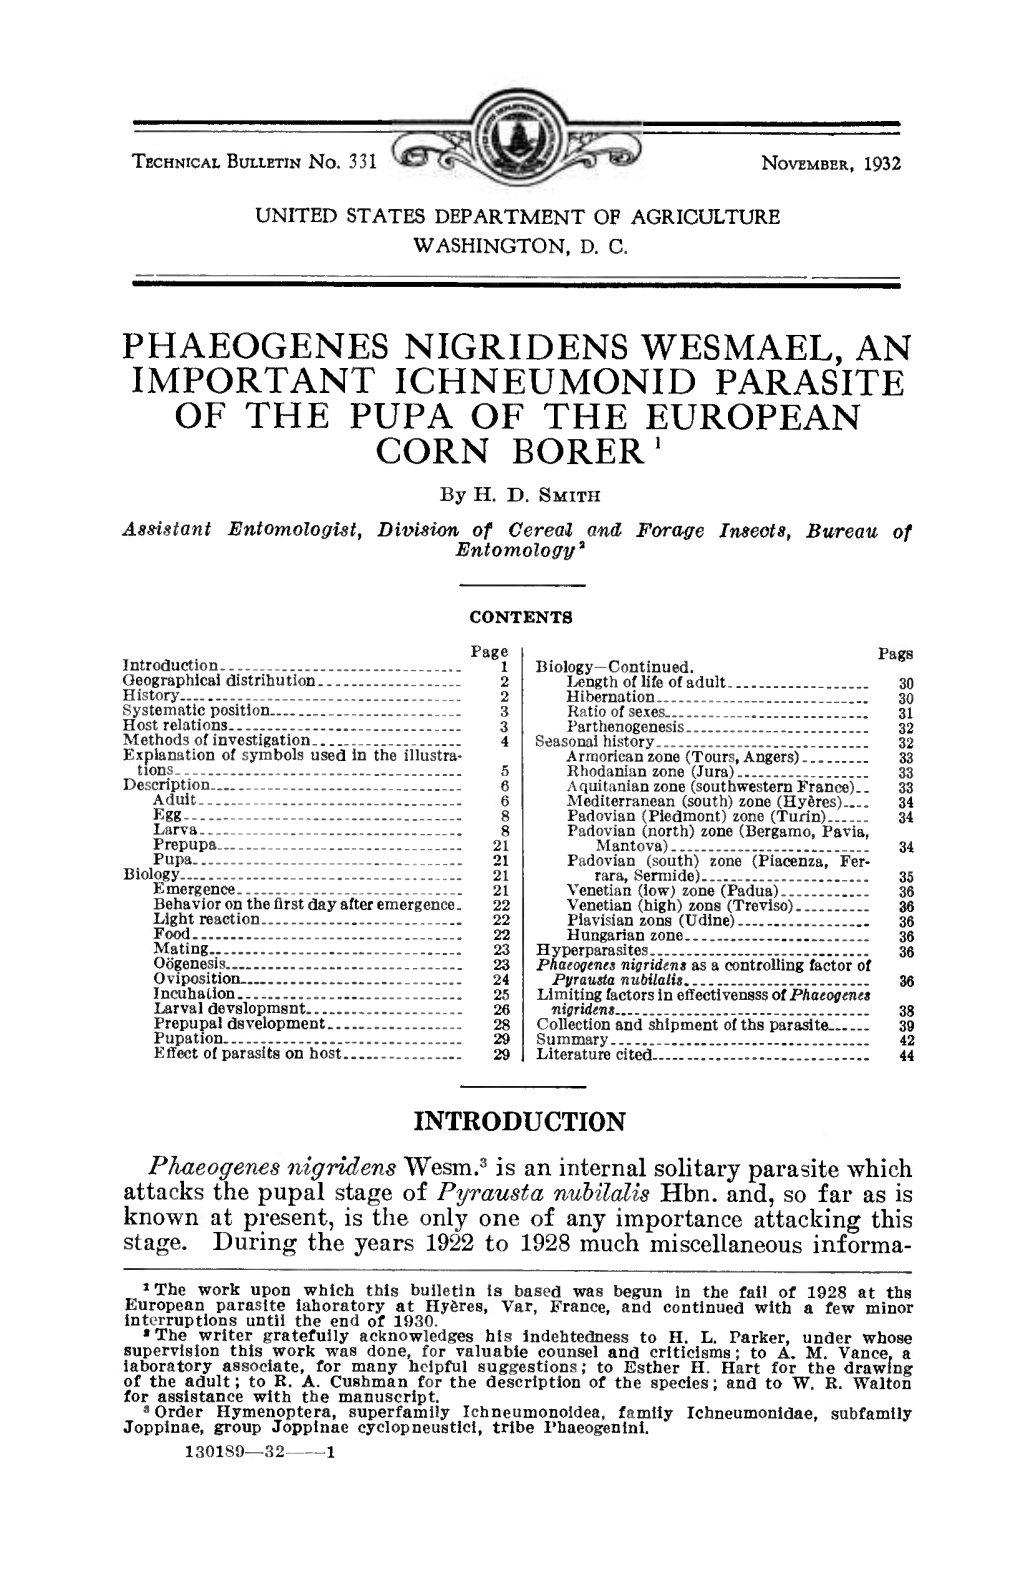 PHAEOGENES NIGRIDENS WESMAEL, an IMPORTANT ICHNEUMONID PARASITE of the PUPA of the EUROPEAN CORN BORERS by H